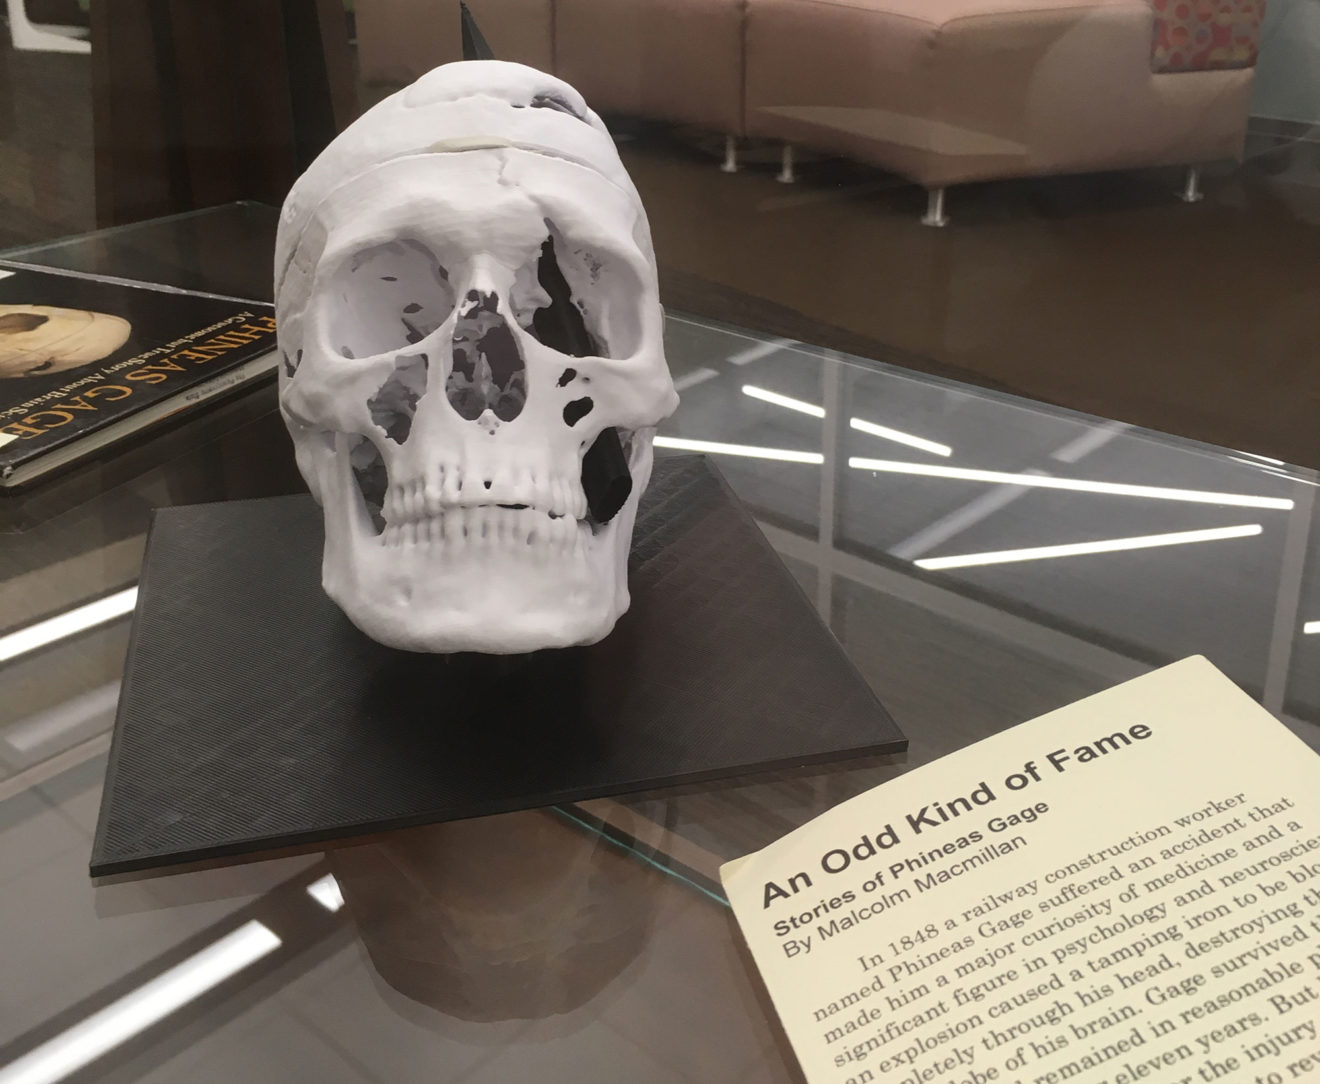 A 3D-printed replica of the skull of Phineas Gage and a copy of an 1850s manuscript about him are seen in a display case.